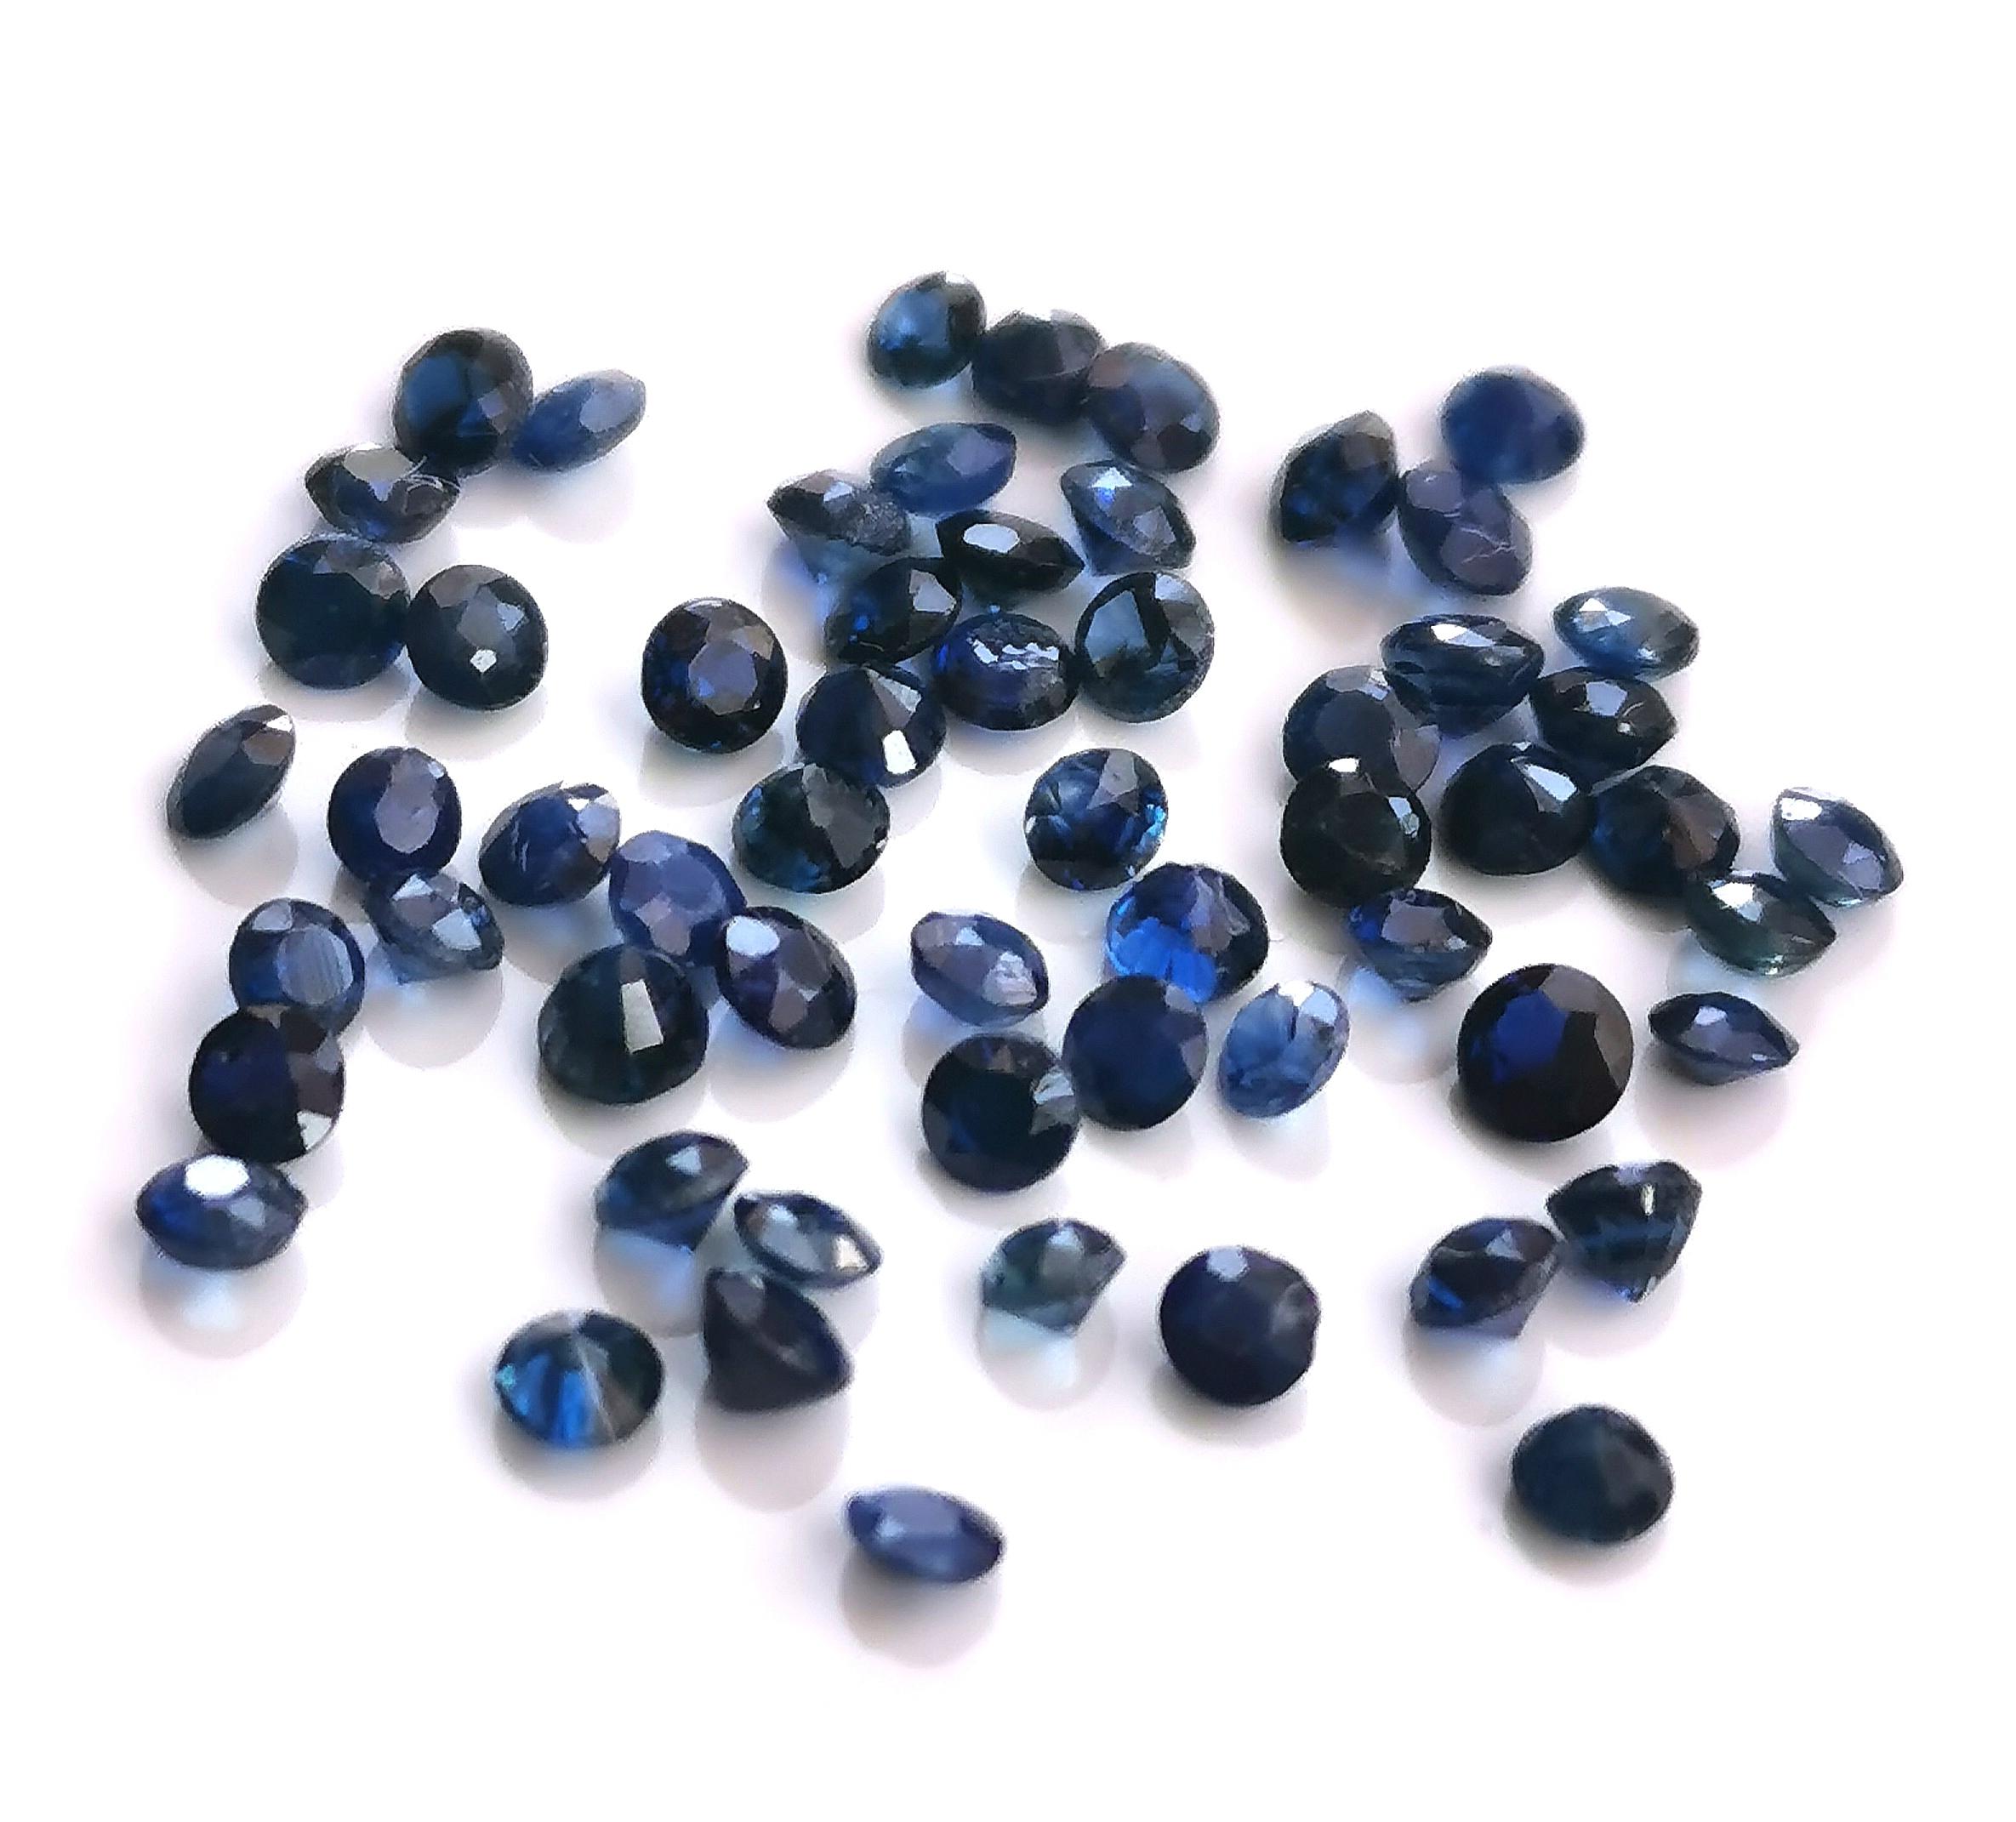 2mm ROUND CABOCHON NATURAL BLUE SAPPHIRE 